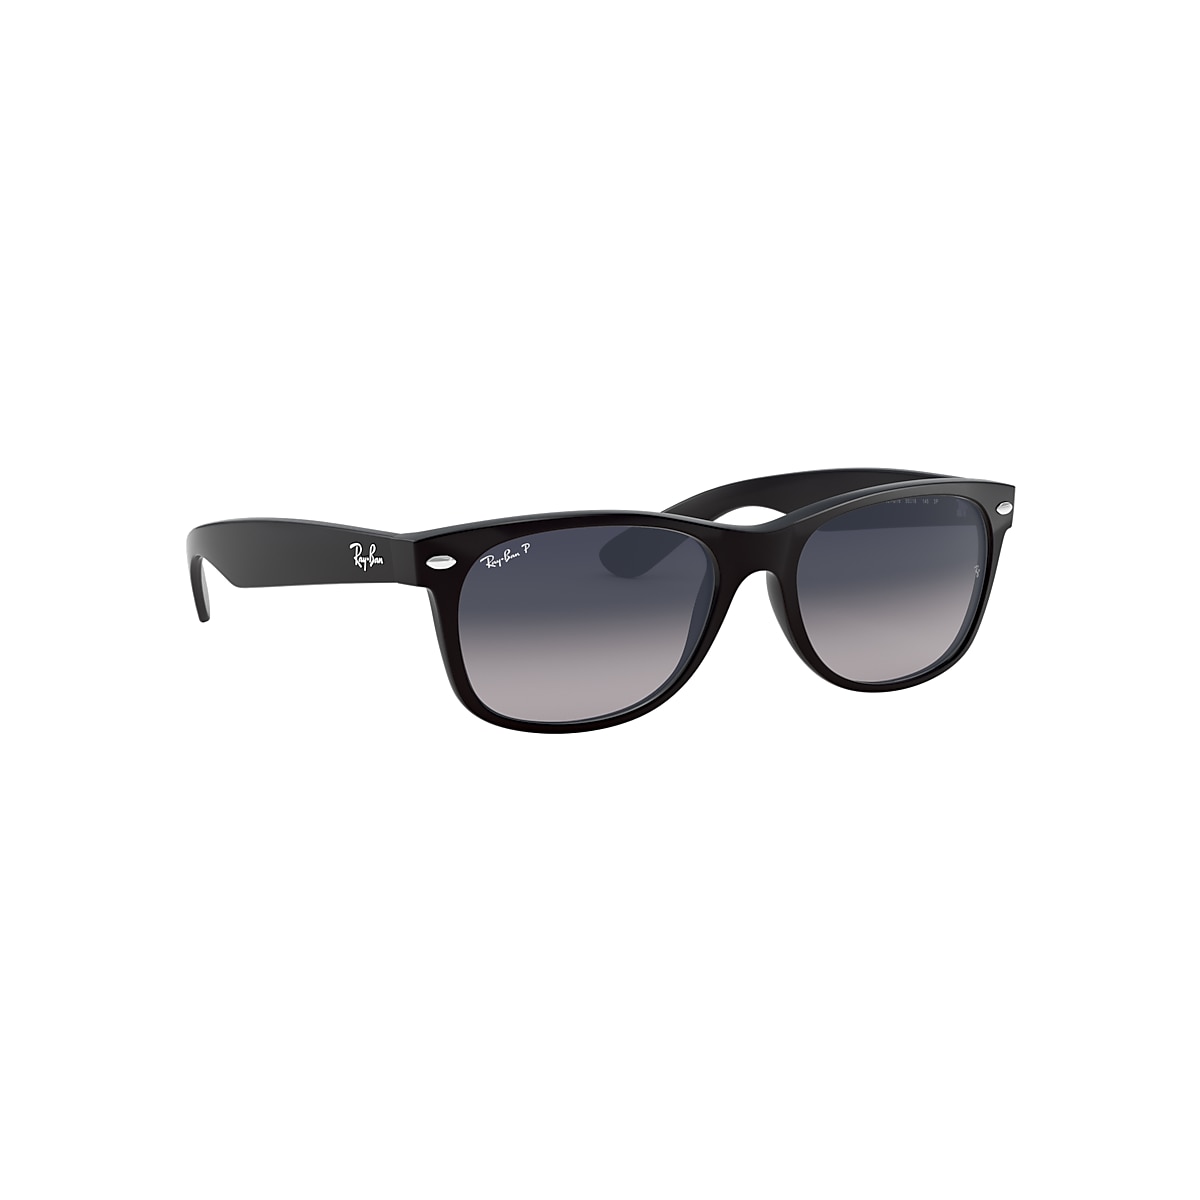 NEW WAYFARER CLASSIC Sunglasses in Black and Blue/Grey - RB2132 